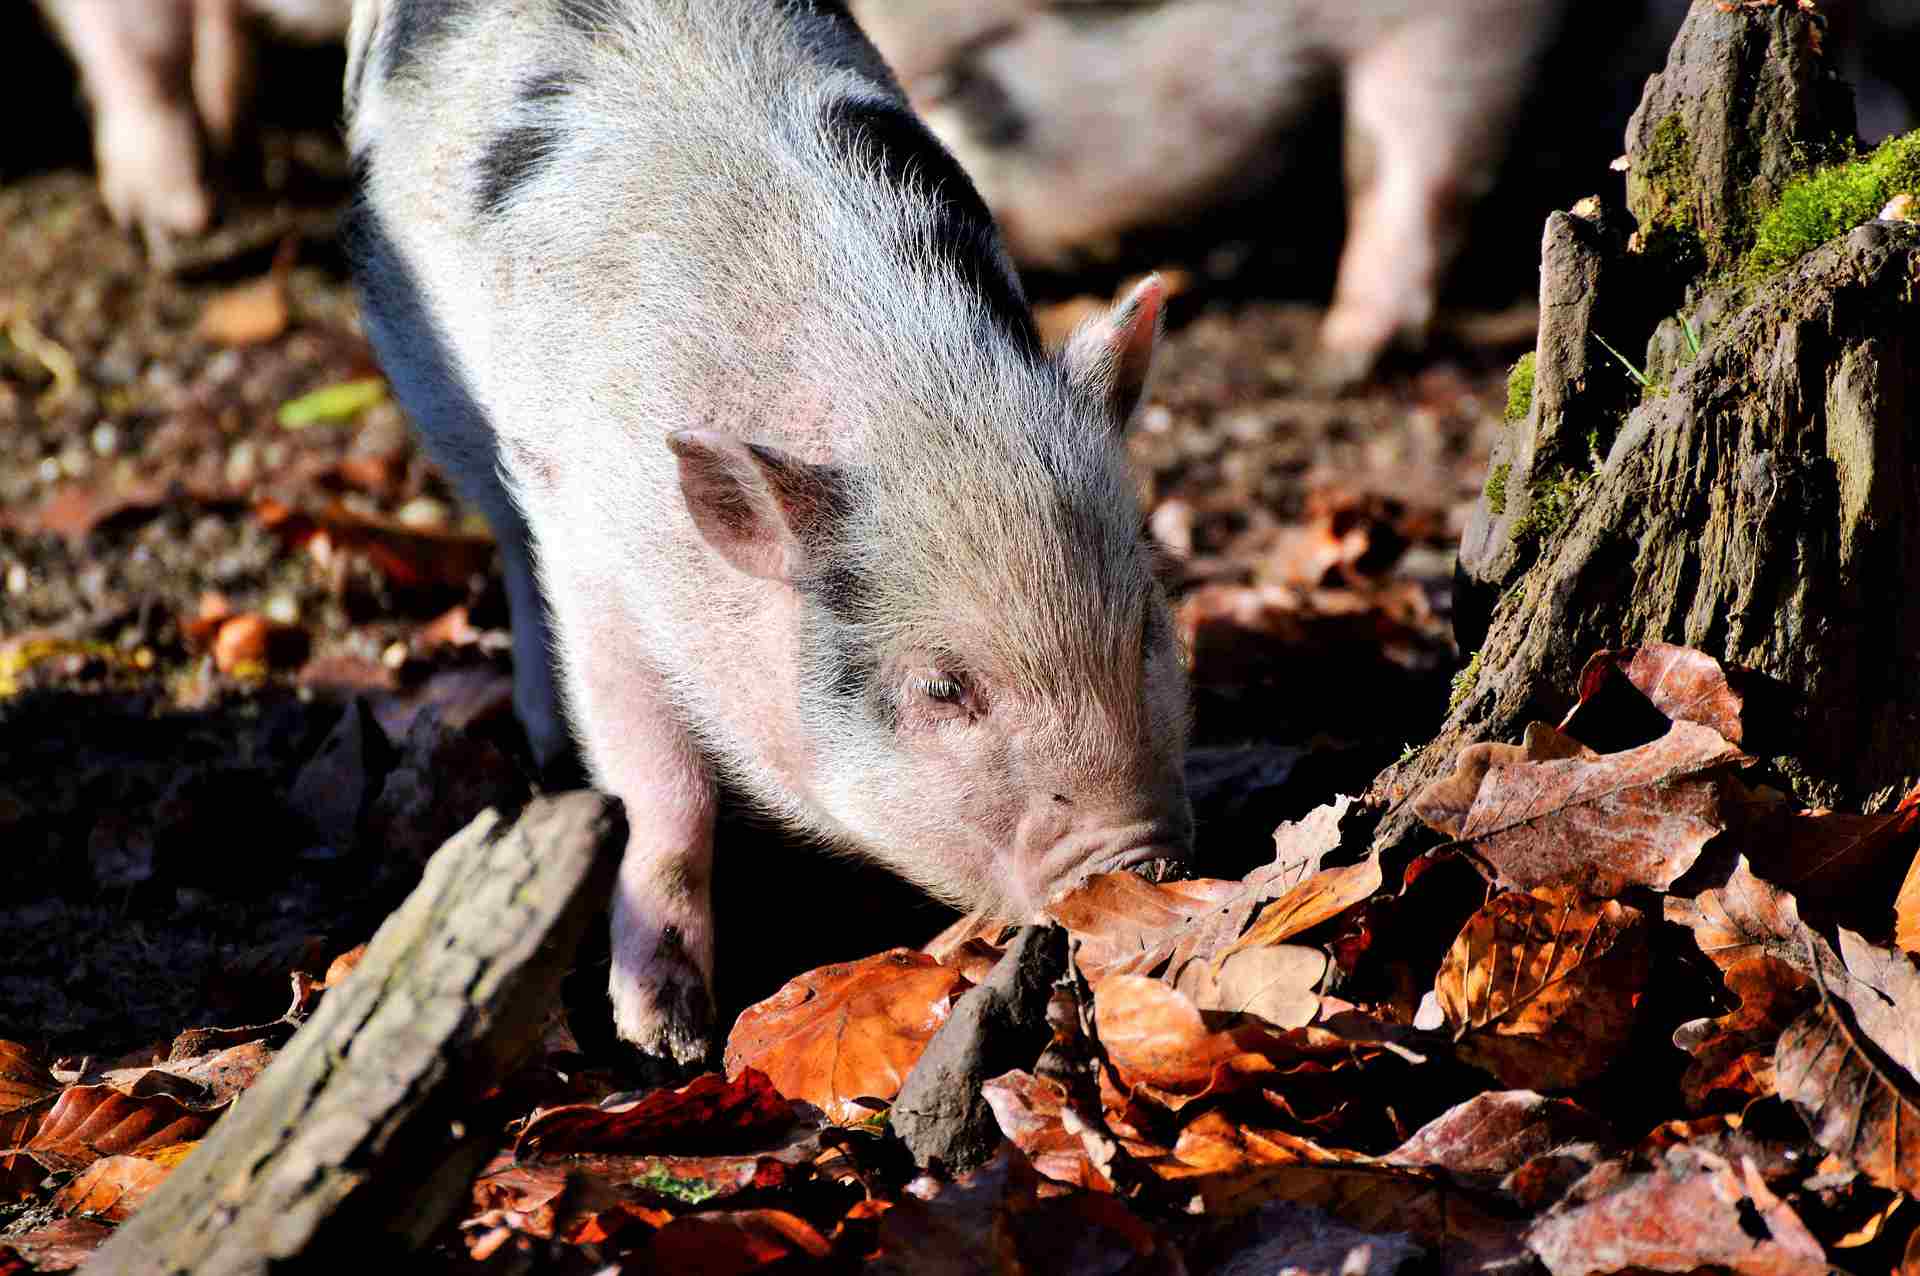 A potbellied pig rooting outdoors.